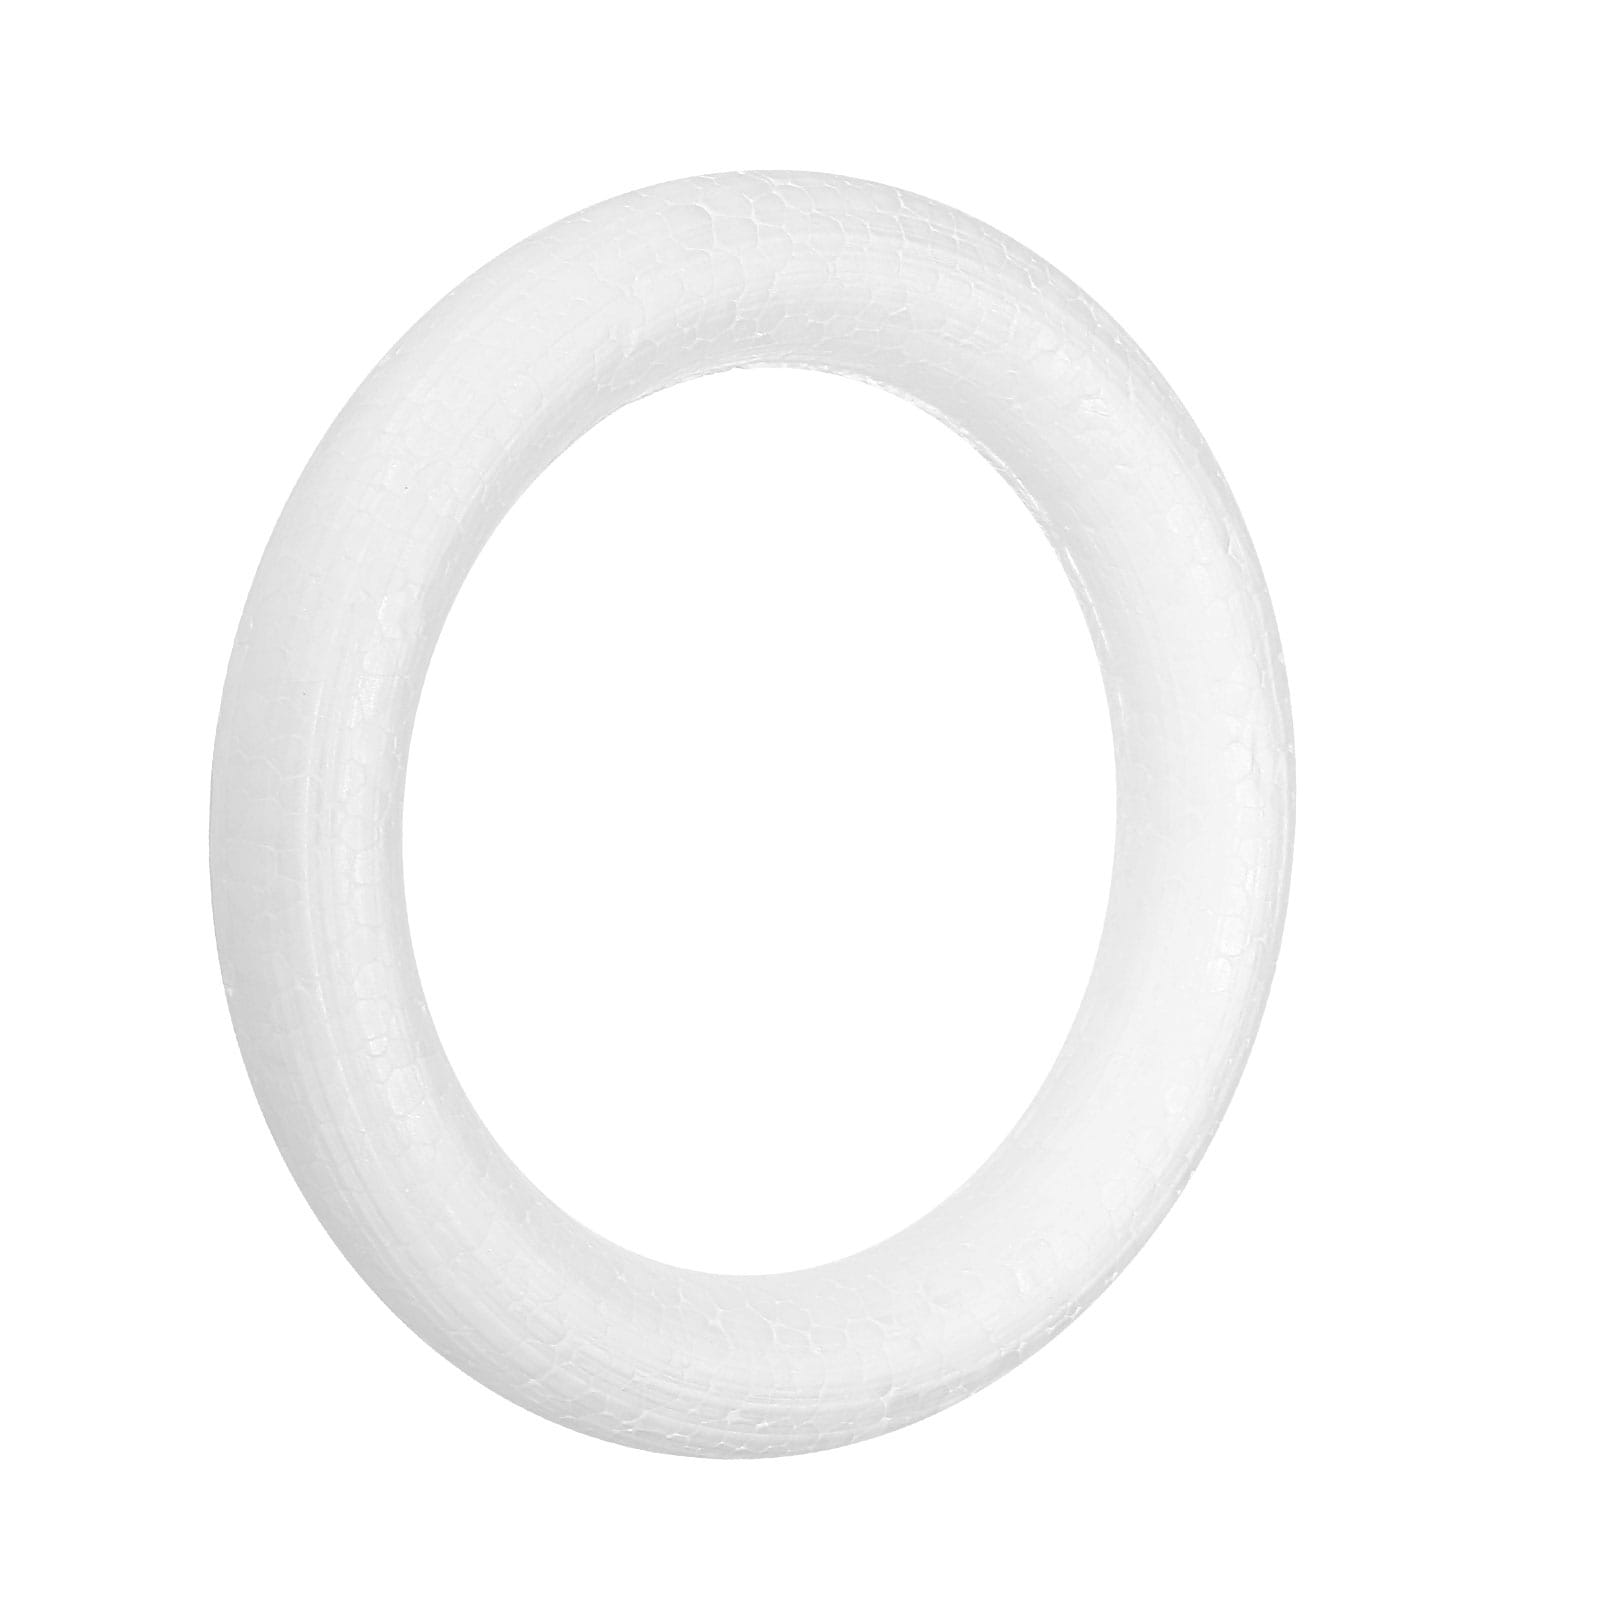 2.8 Inch Foam Wreath Forms Round Craft Rings for DIY Art Florists Pack of 2  